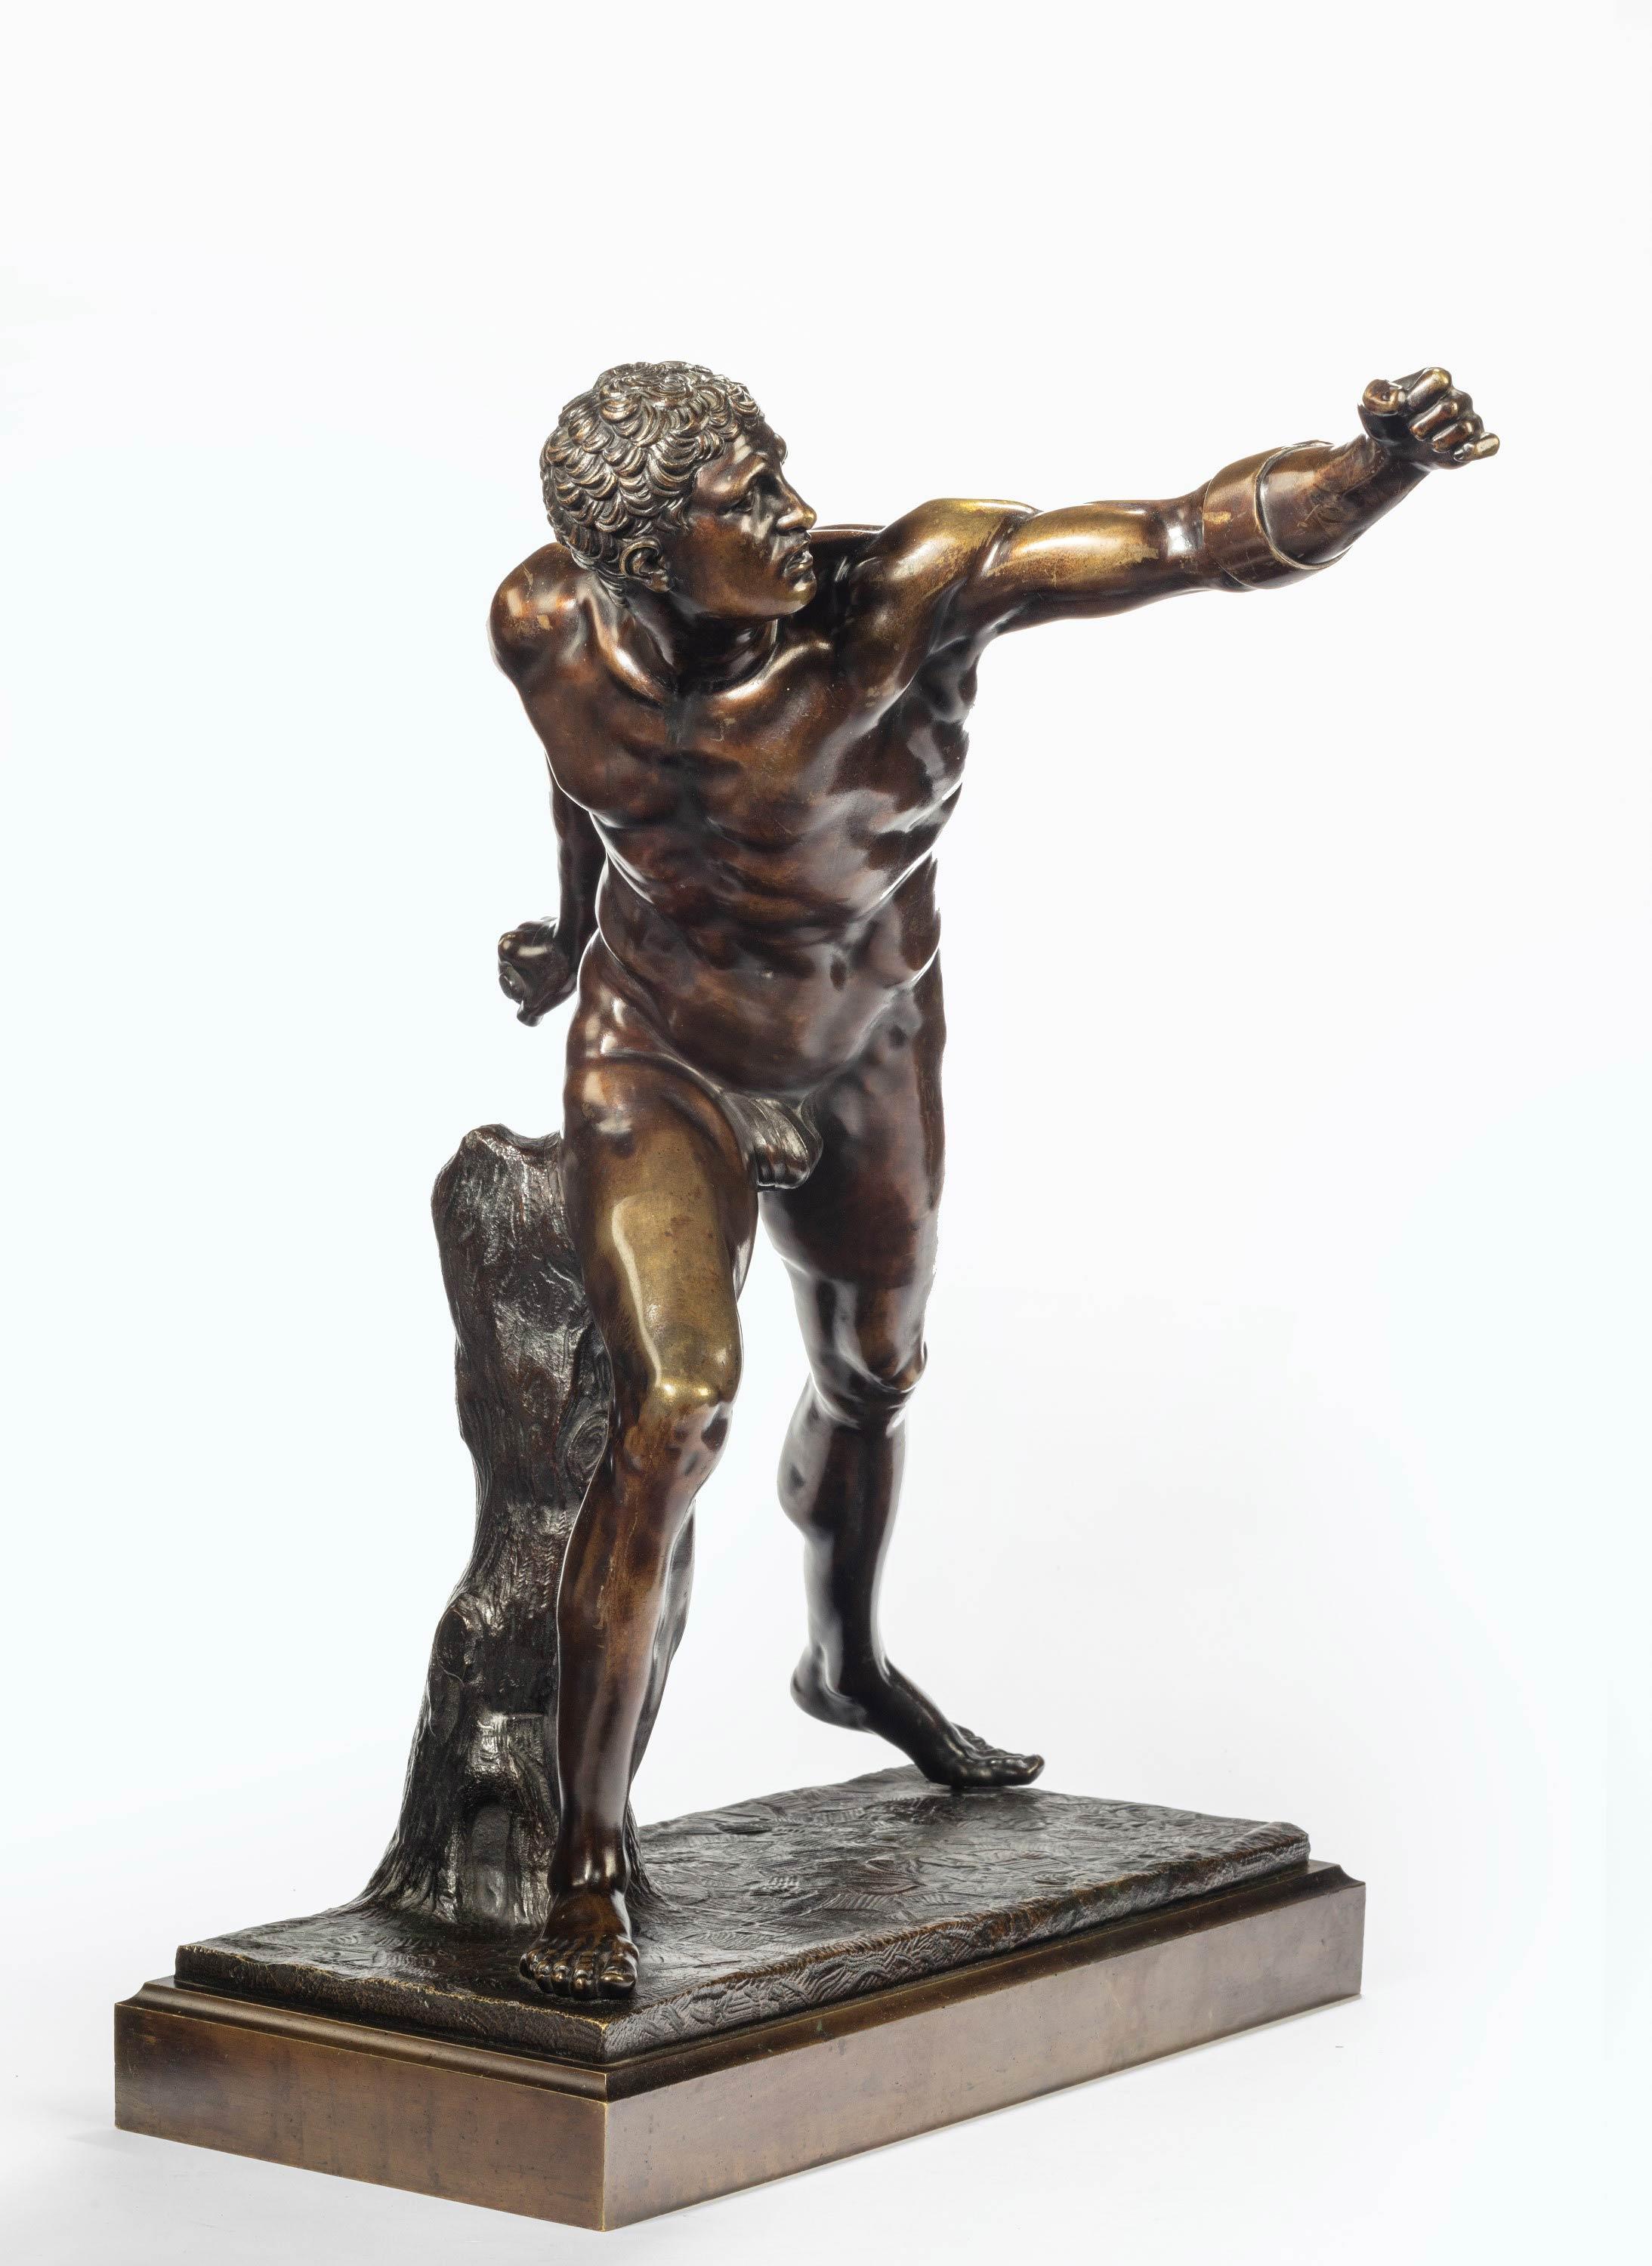 Very Well Cast 19th Century Bronze of a Gladiator 2